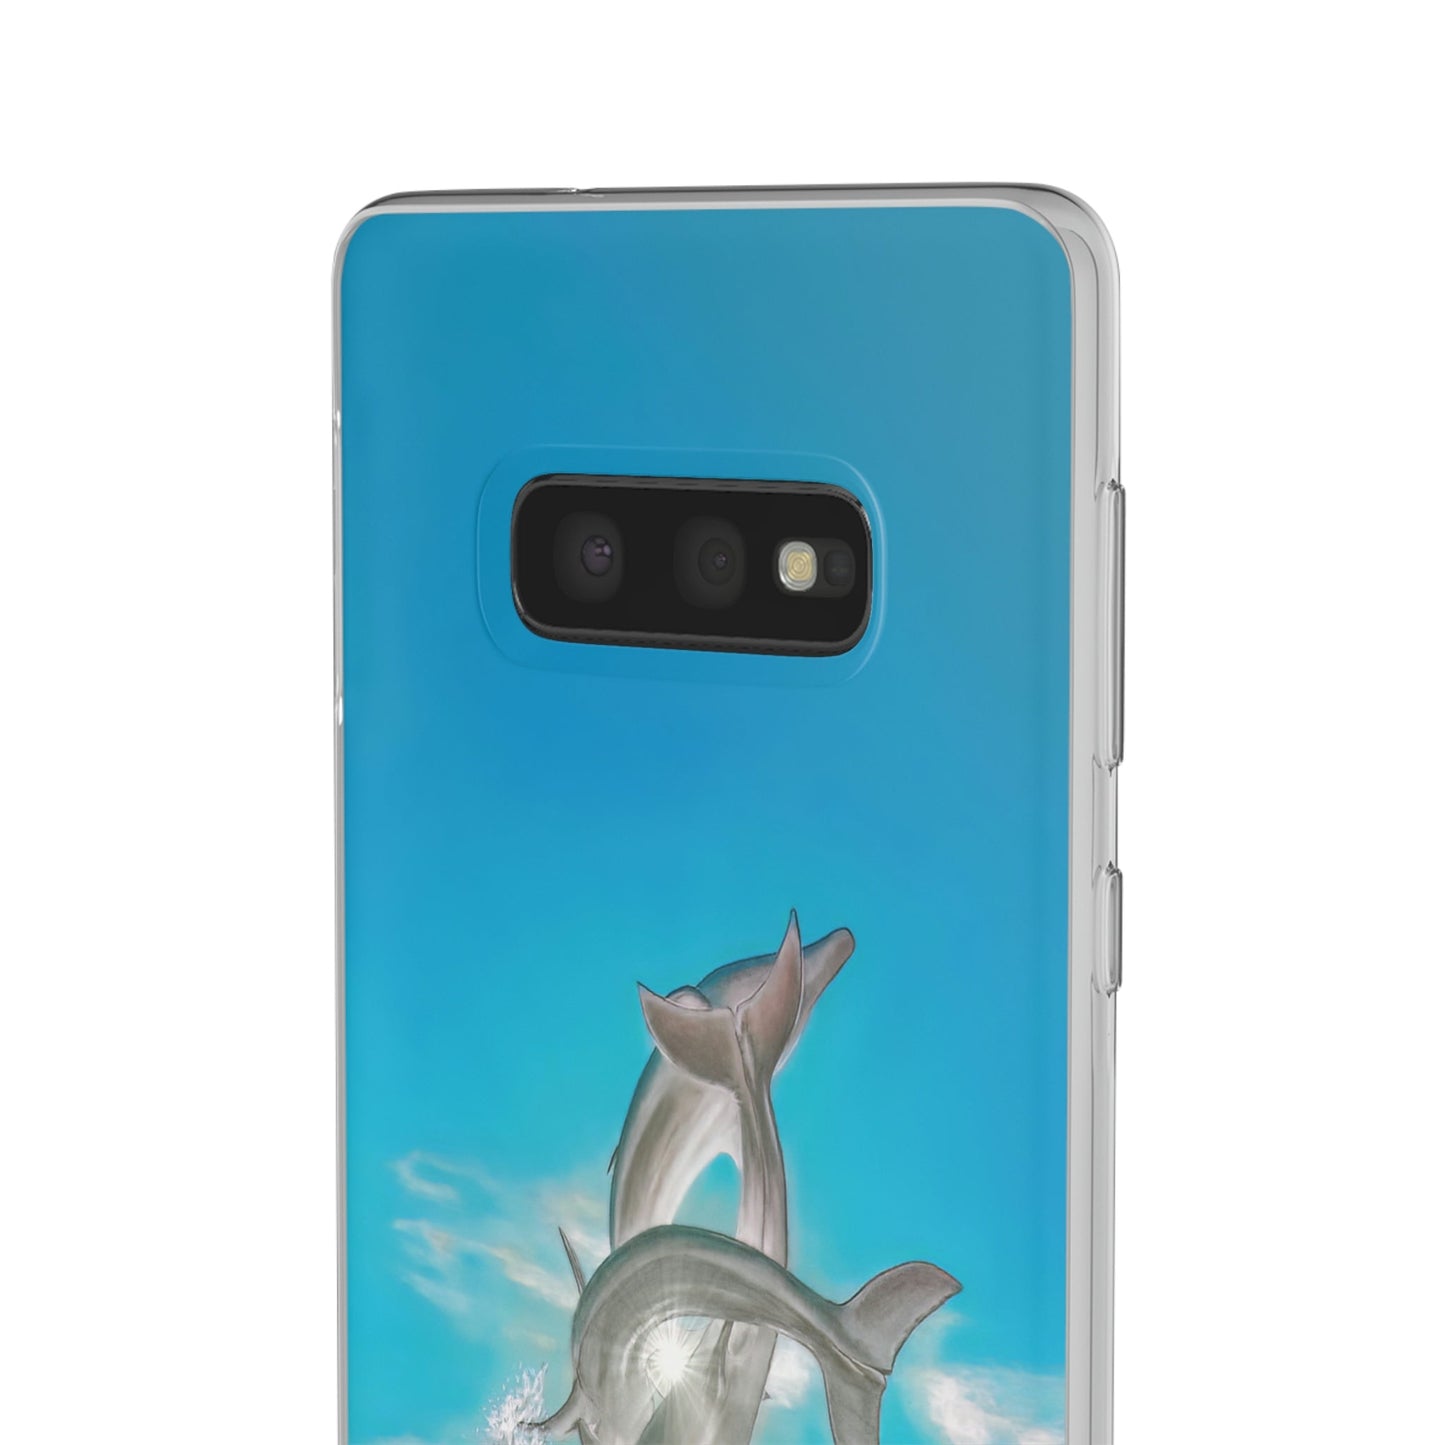 Flexi Cases - "THE DOLPHINS" Kelowna, BC